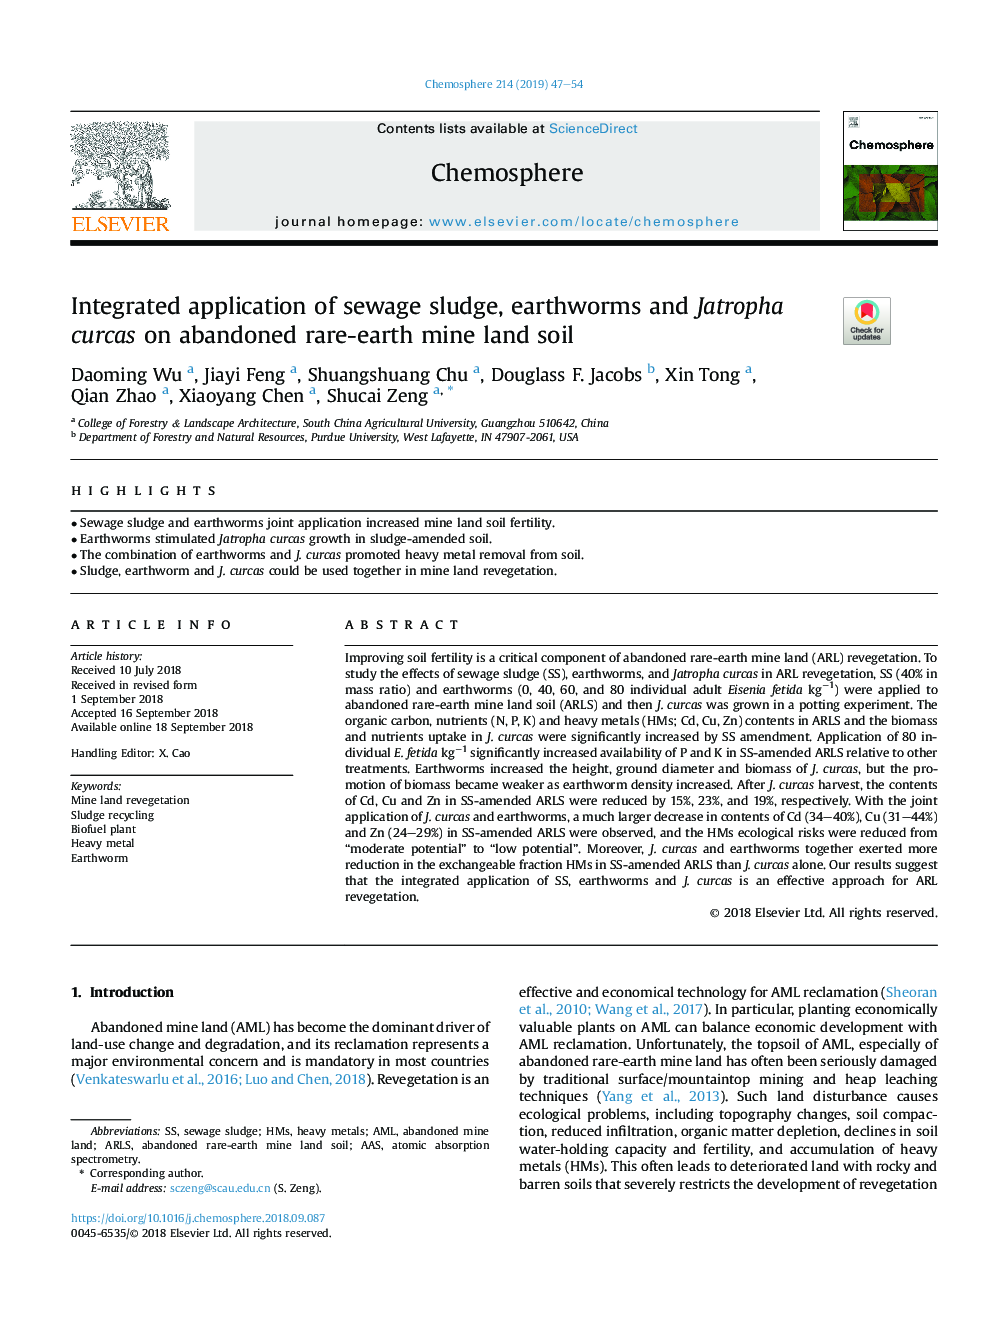 Integrated application of sewage sludge, earthworms and Jatropha curcas on abandoned rare-earth mine land soil